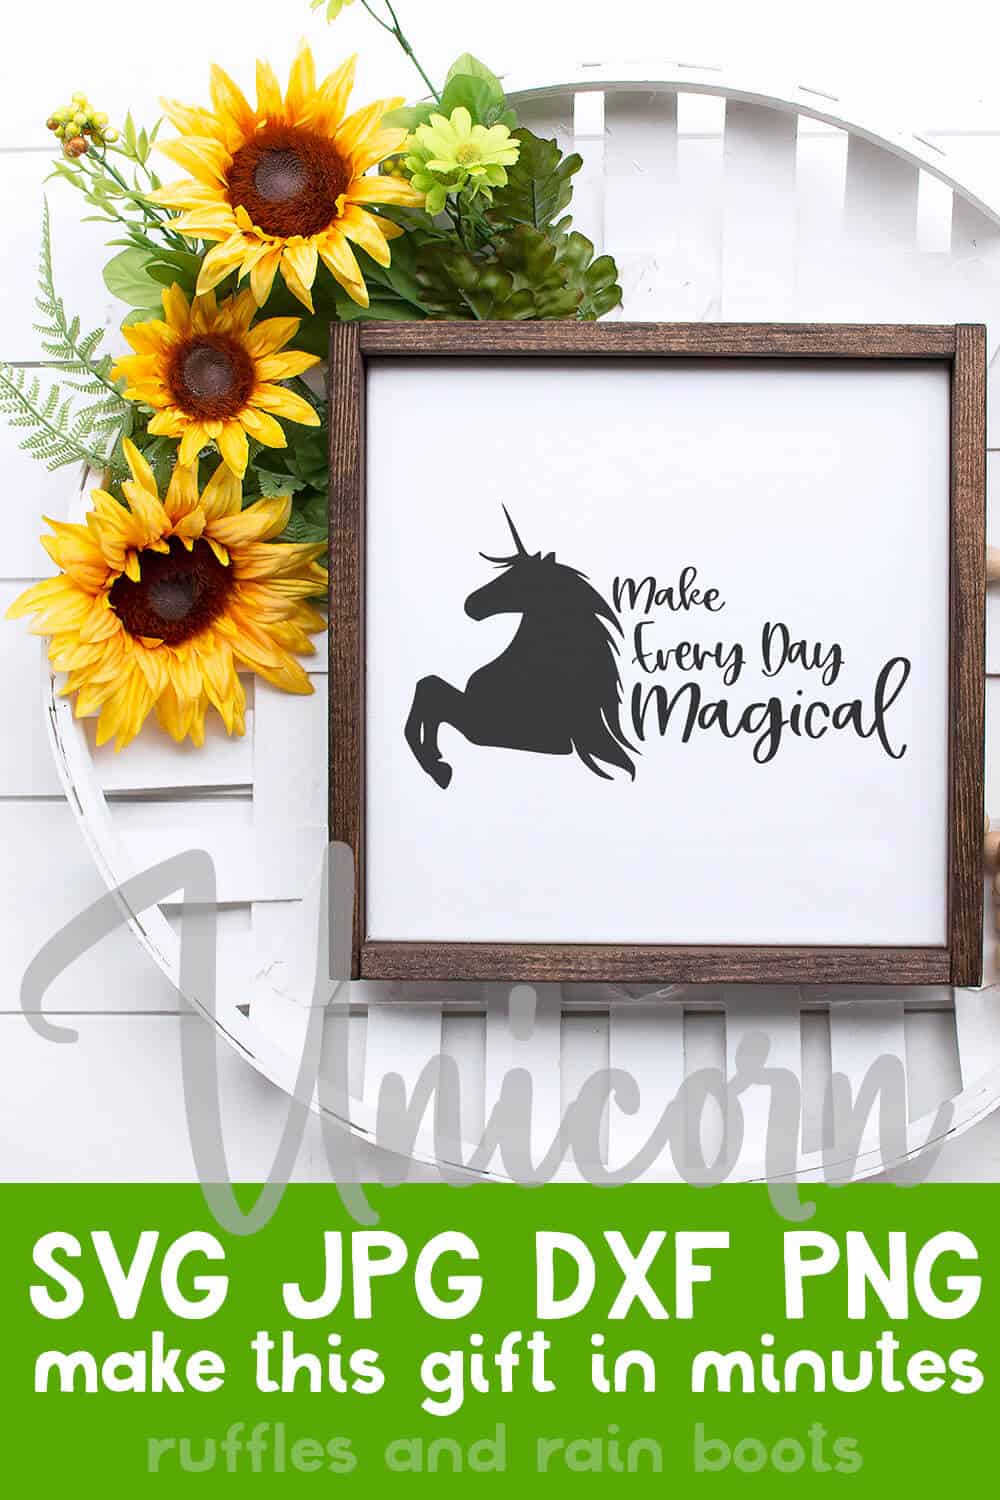 make everyday magical free unicorn cut file for cricut on pretty sunflower wall sign with text which reads unicorn svg jpg dxf png make this gift in minutes